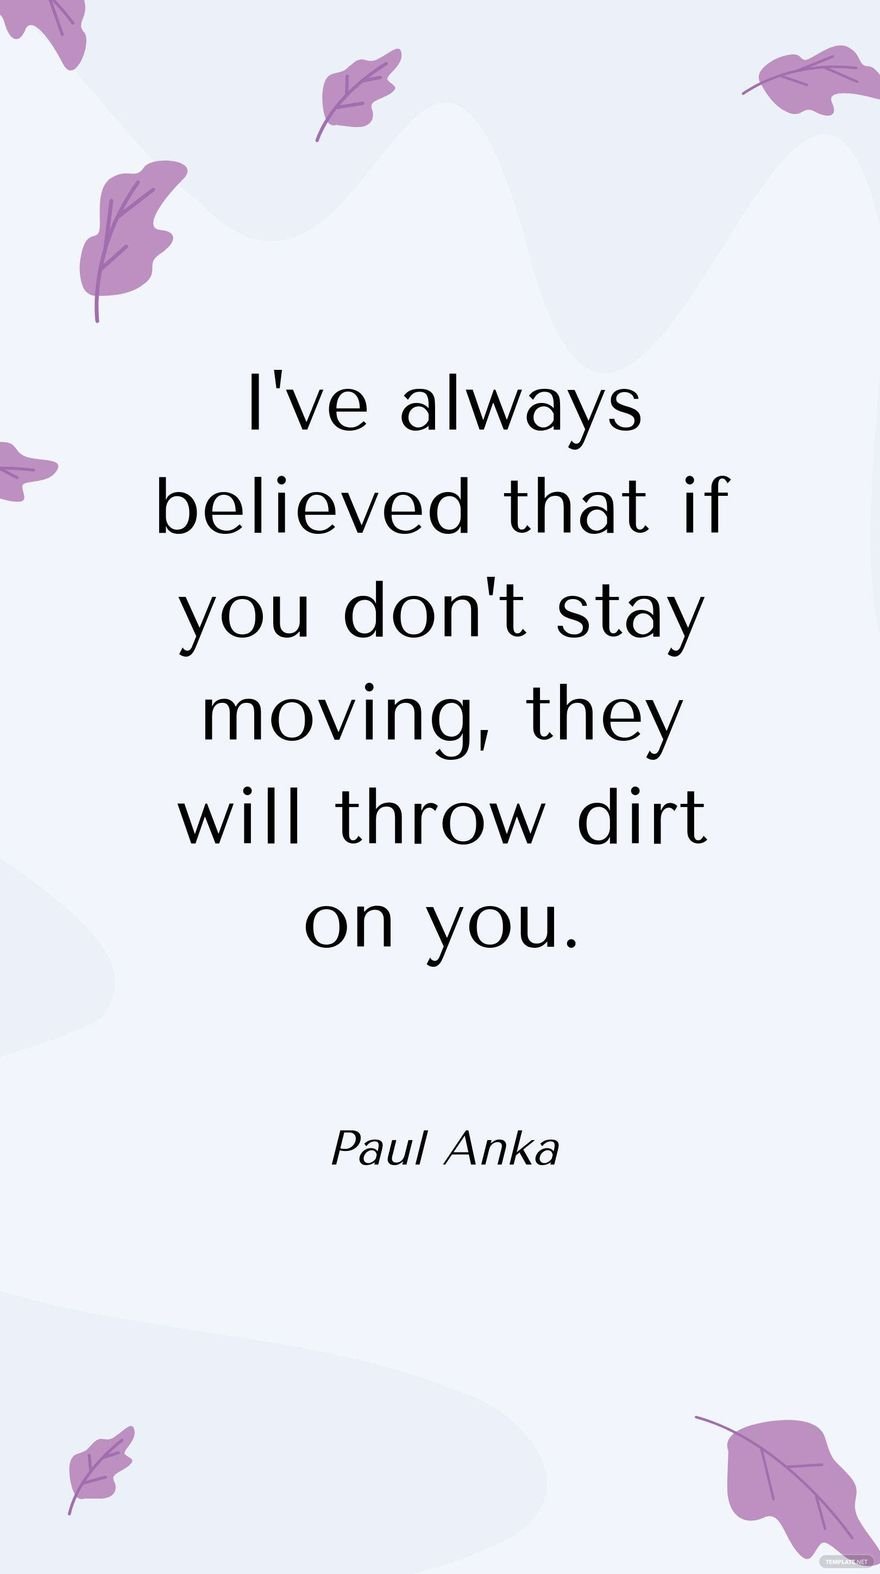 Paul Anka - I've always believed that if you don't stay moving, they will throw dirt on you.